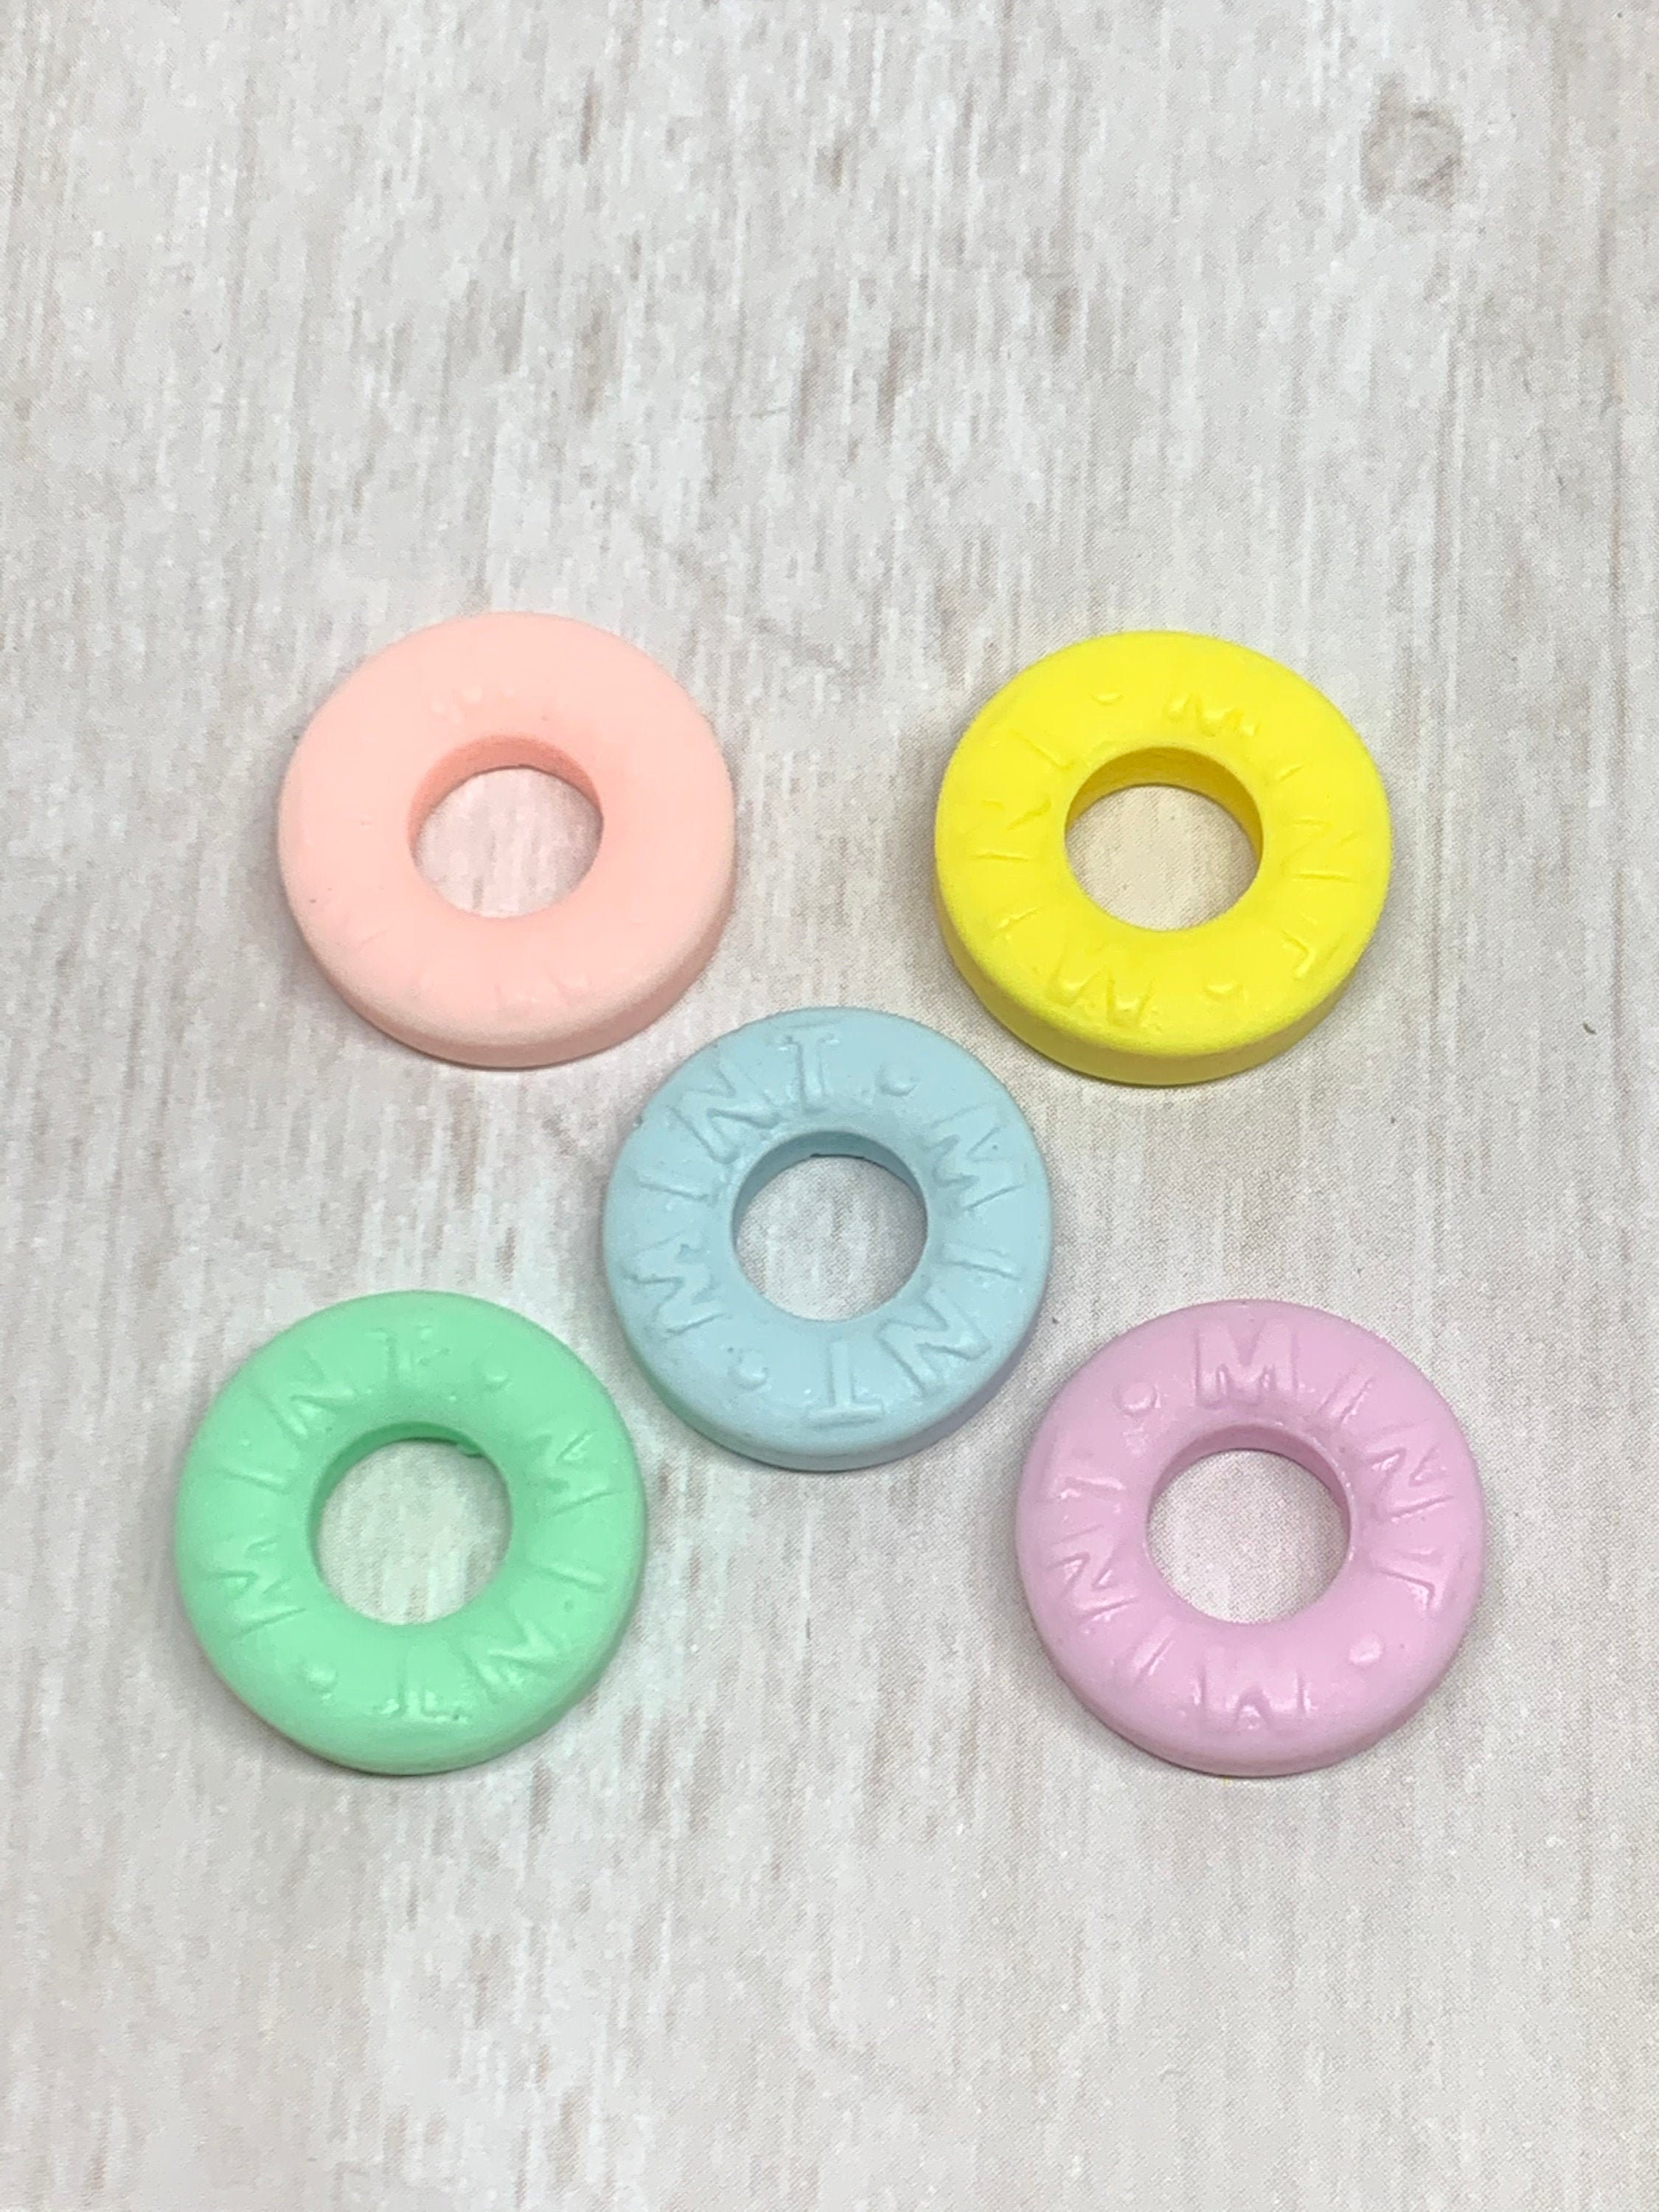 5 fake mints 18mm faux candy candy cabochons pastel candy | Etsy